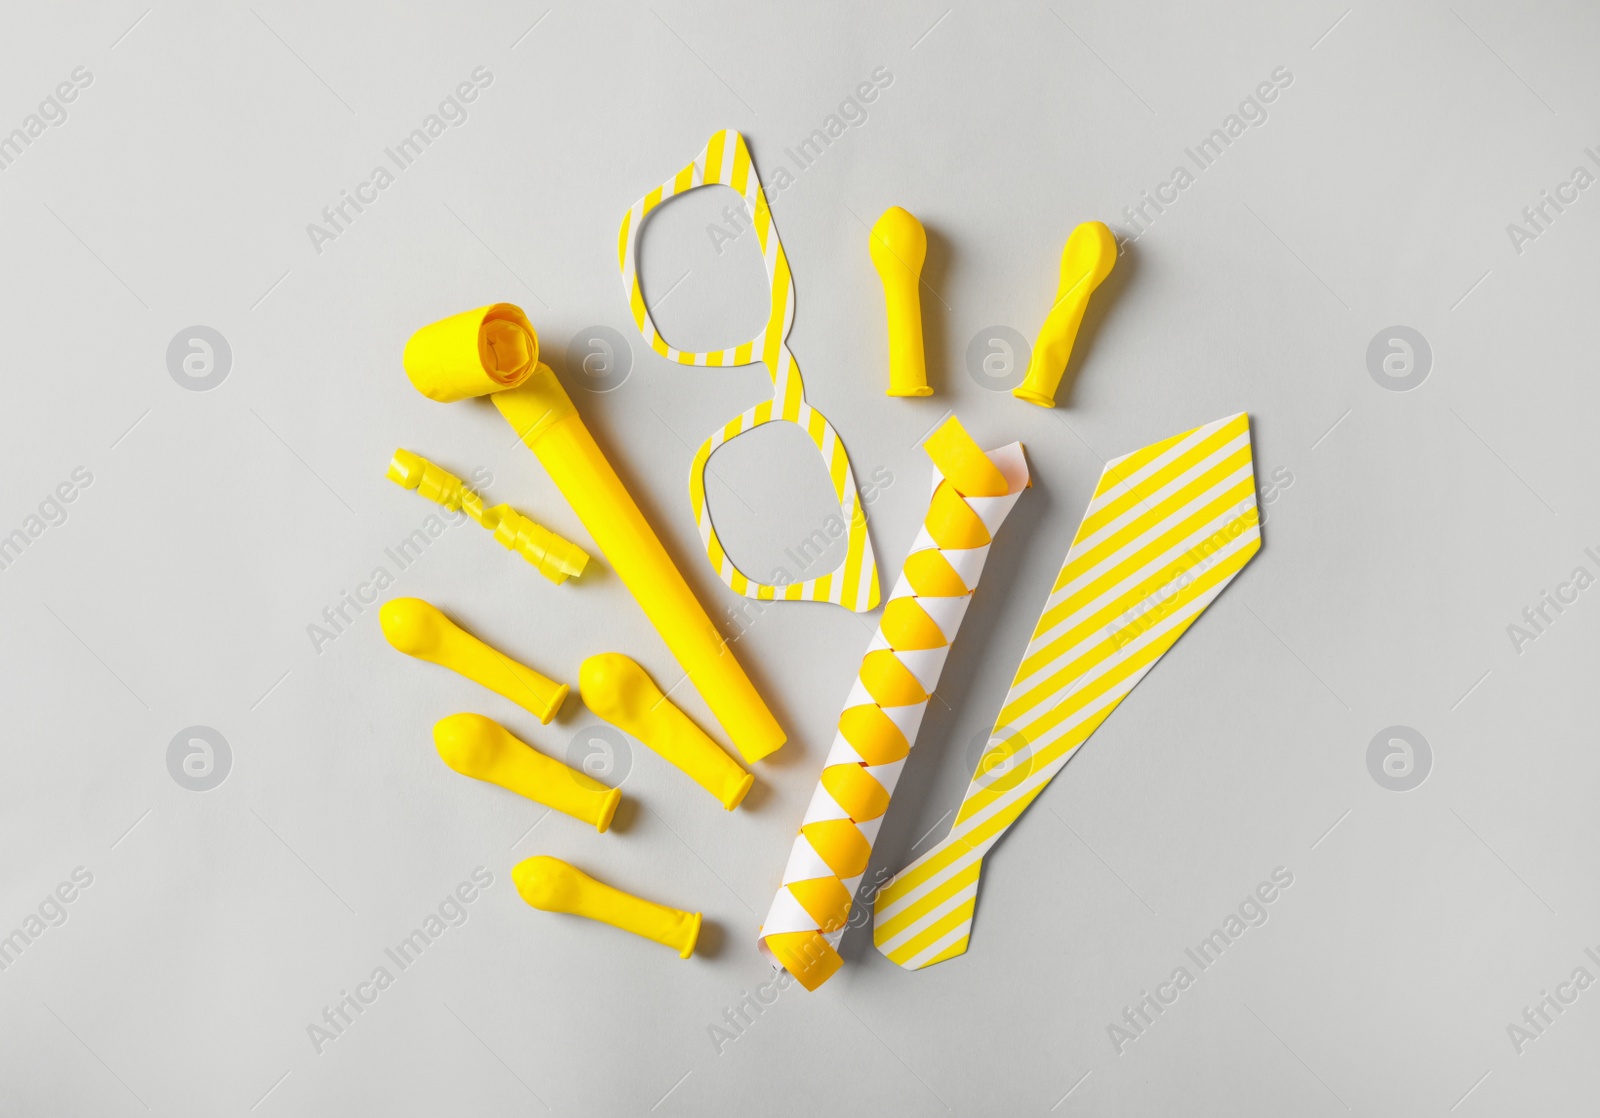 Photo of Different clown's accessories on light background, flat lay